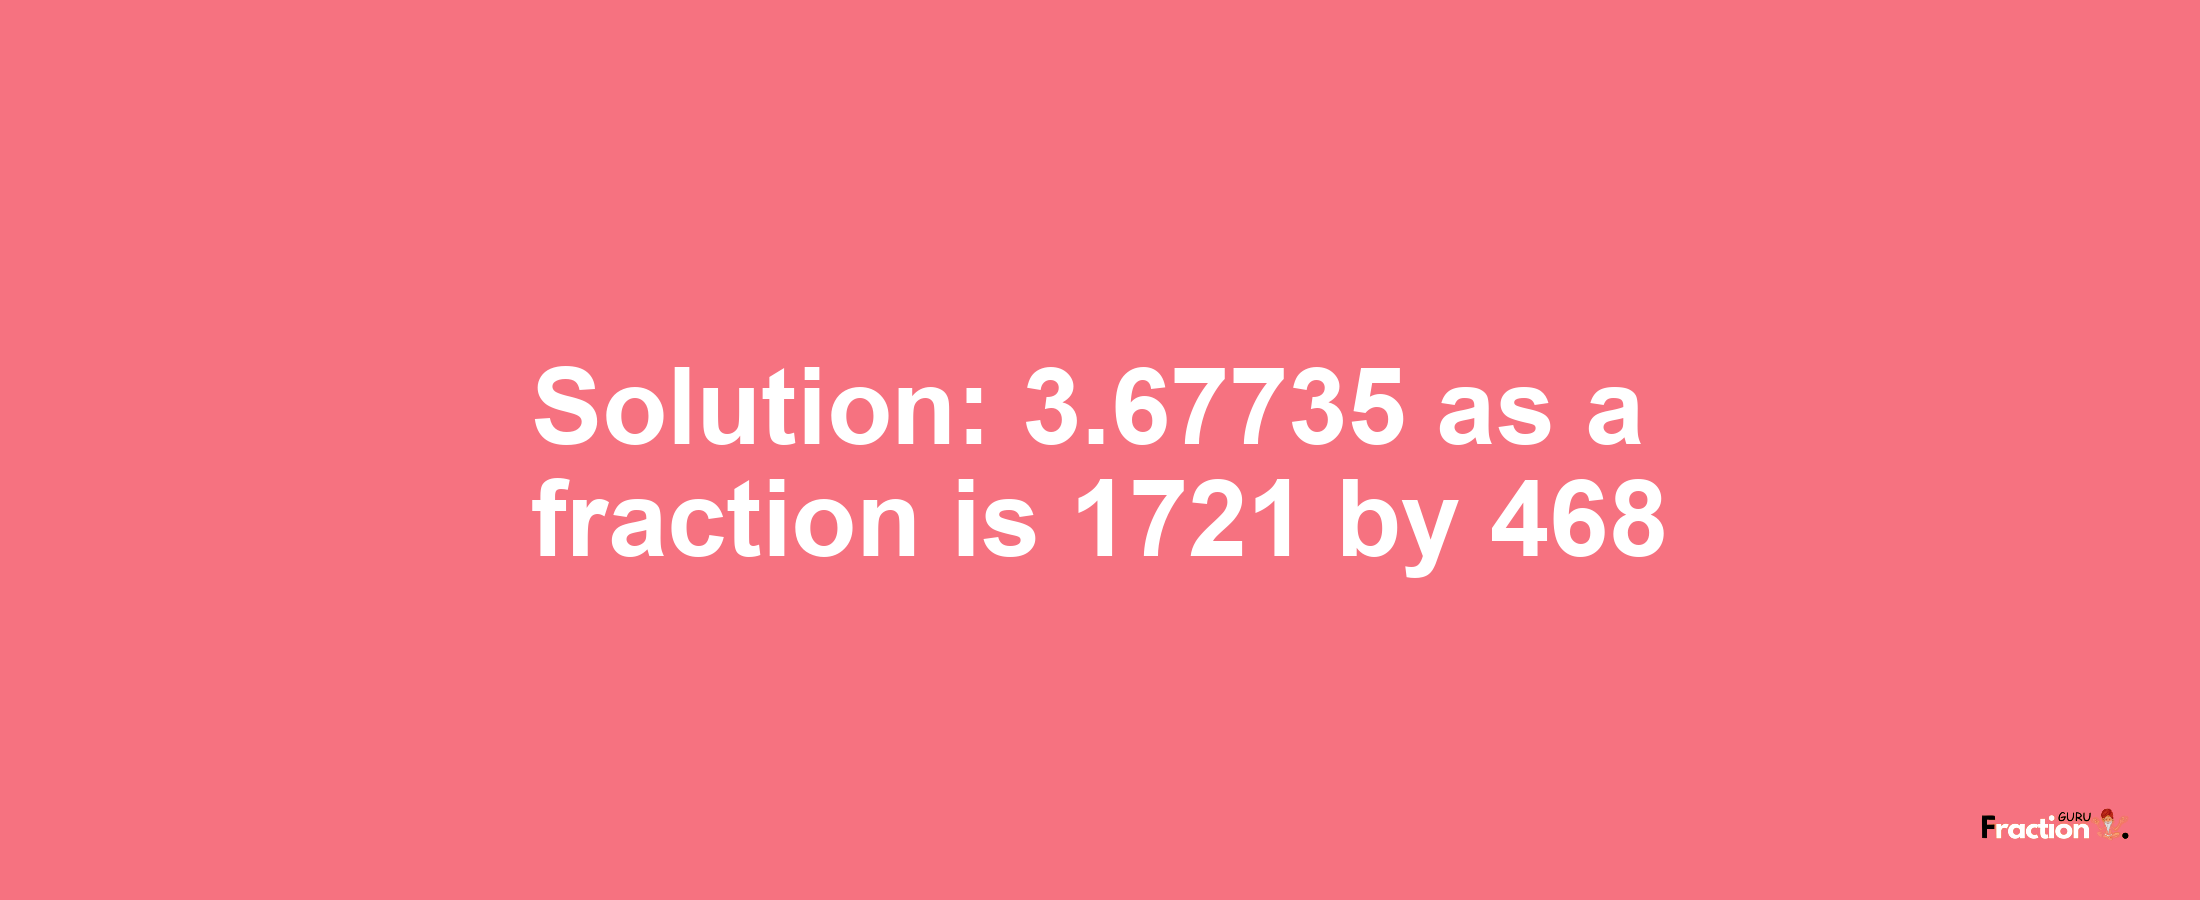 Solution:3.67735 as a fraction is 1721/468